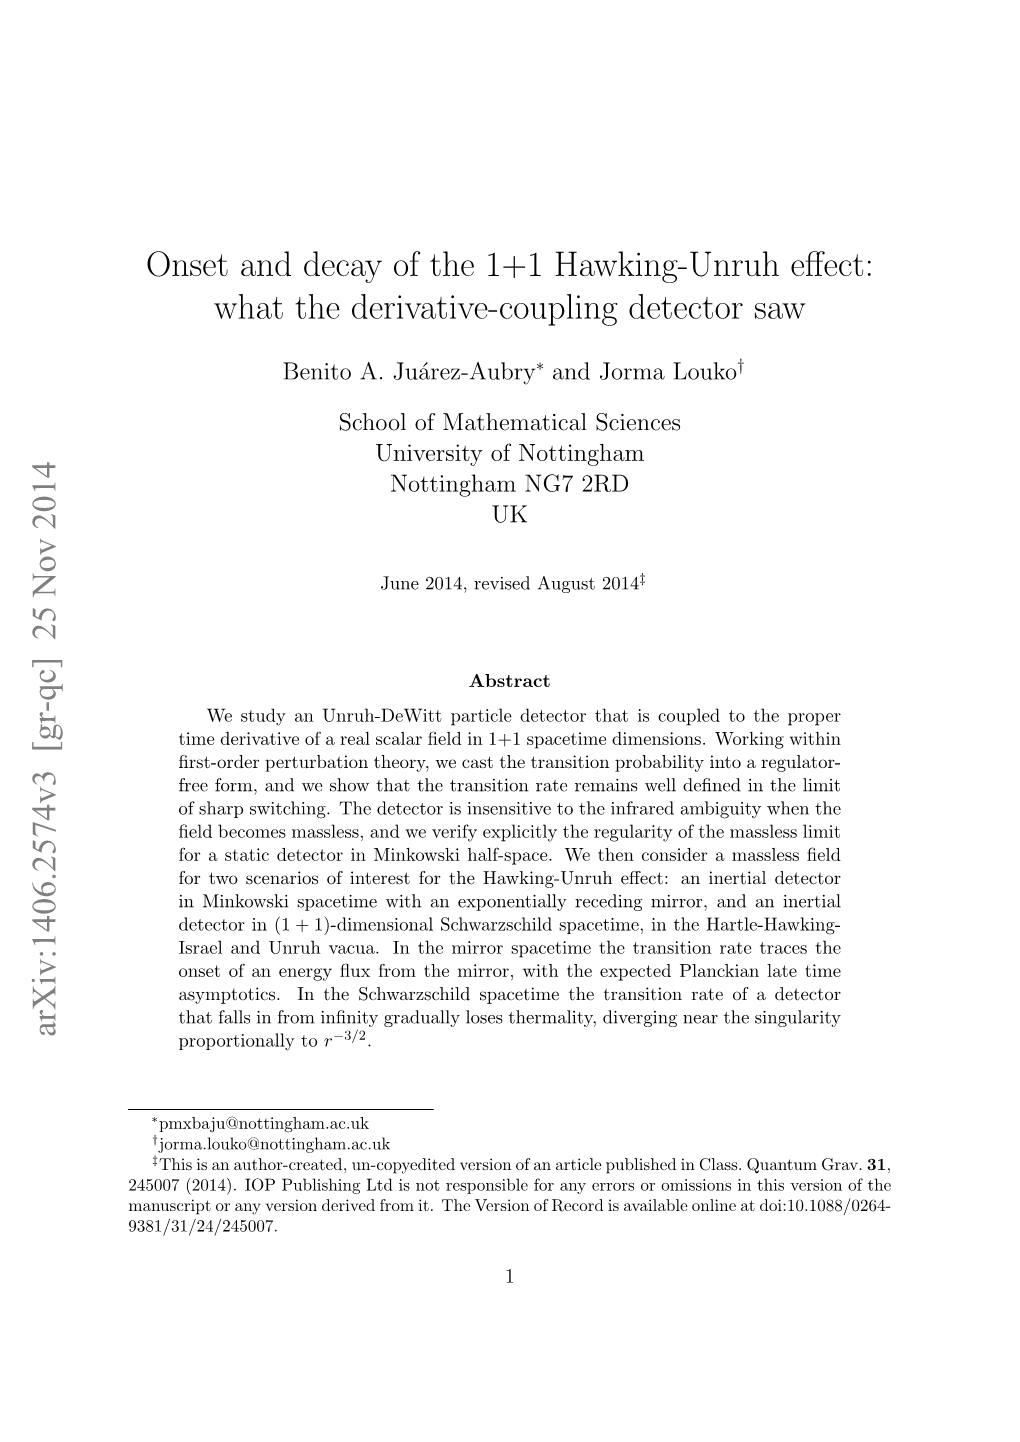 Onset and Decay of the 1+1 Hawking-Unruh Effect